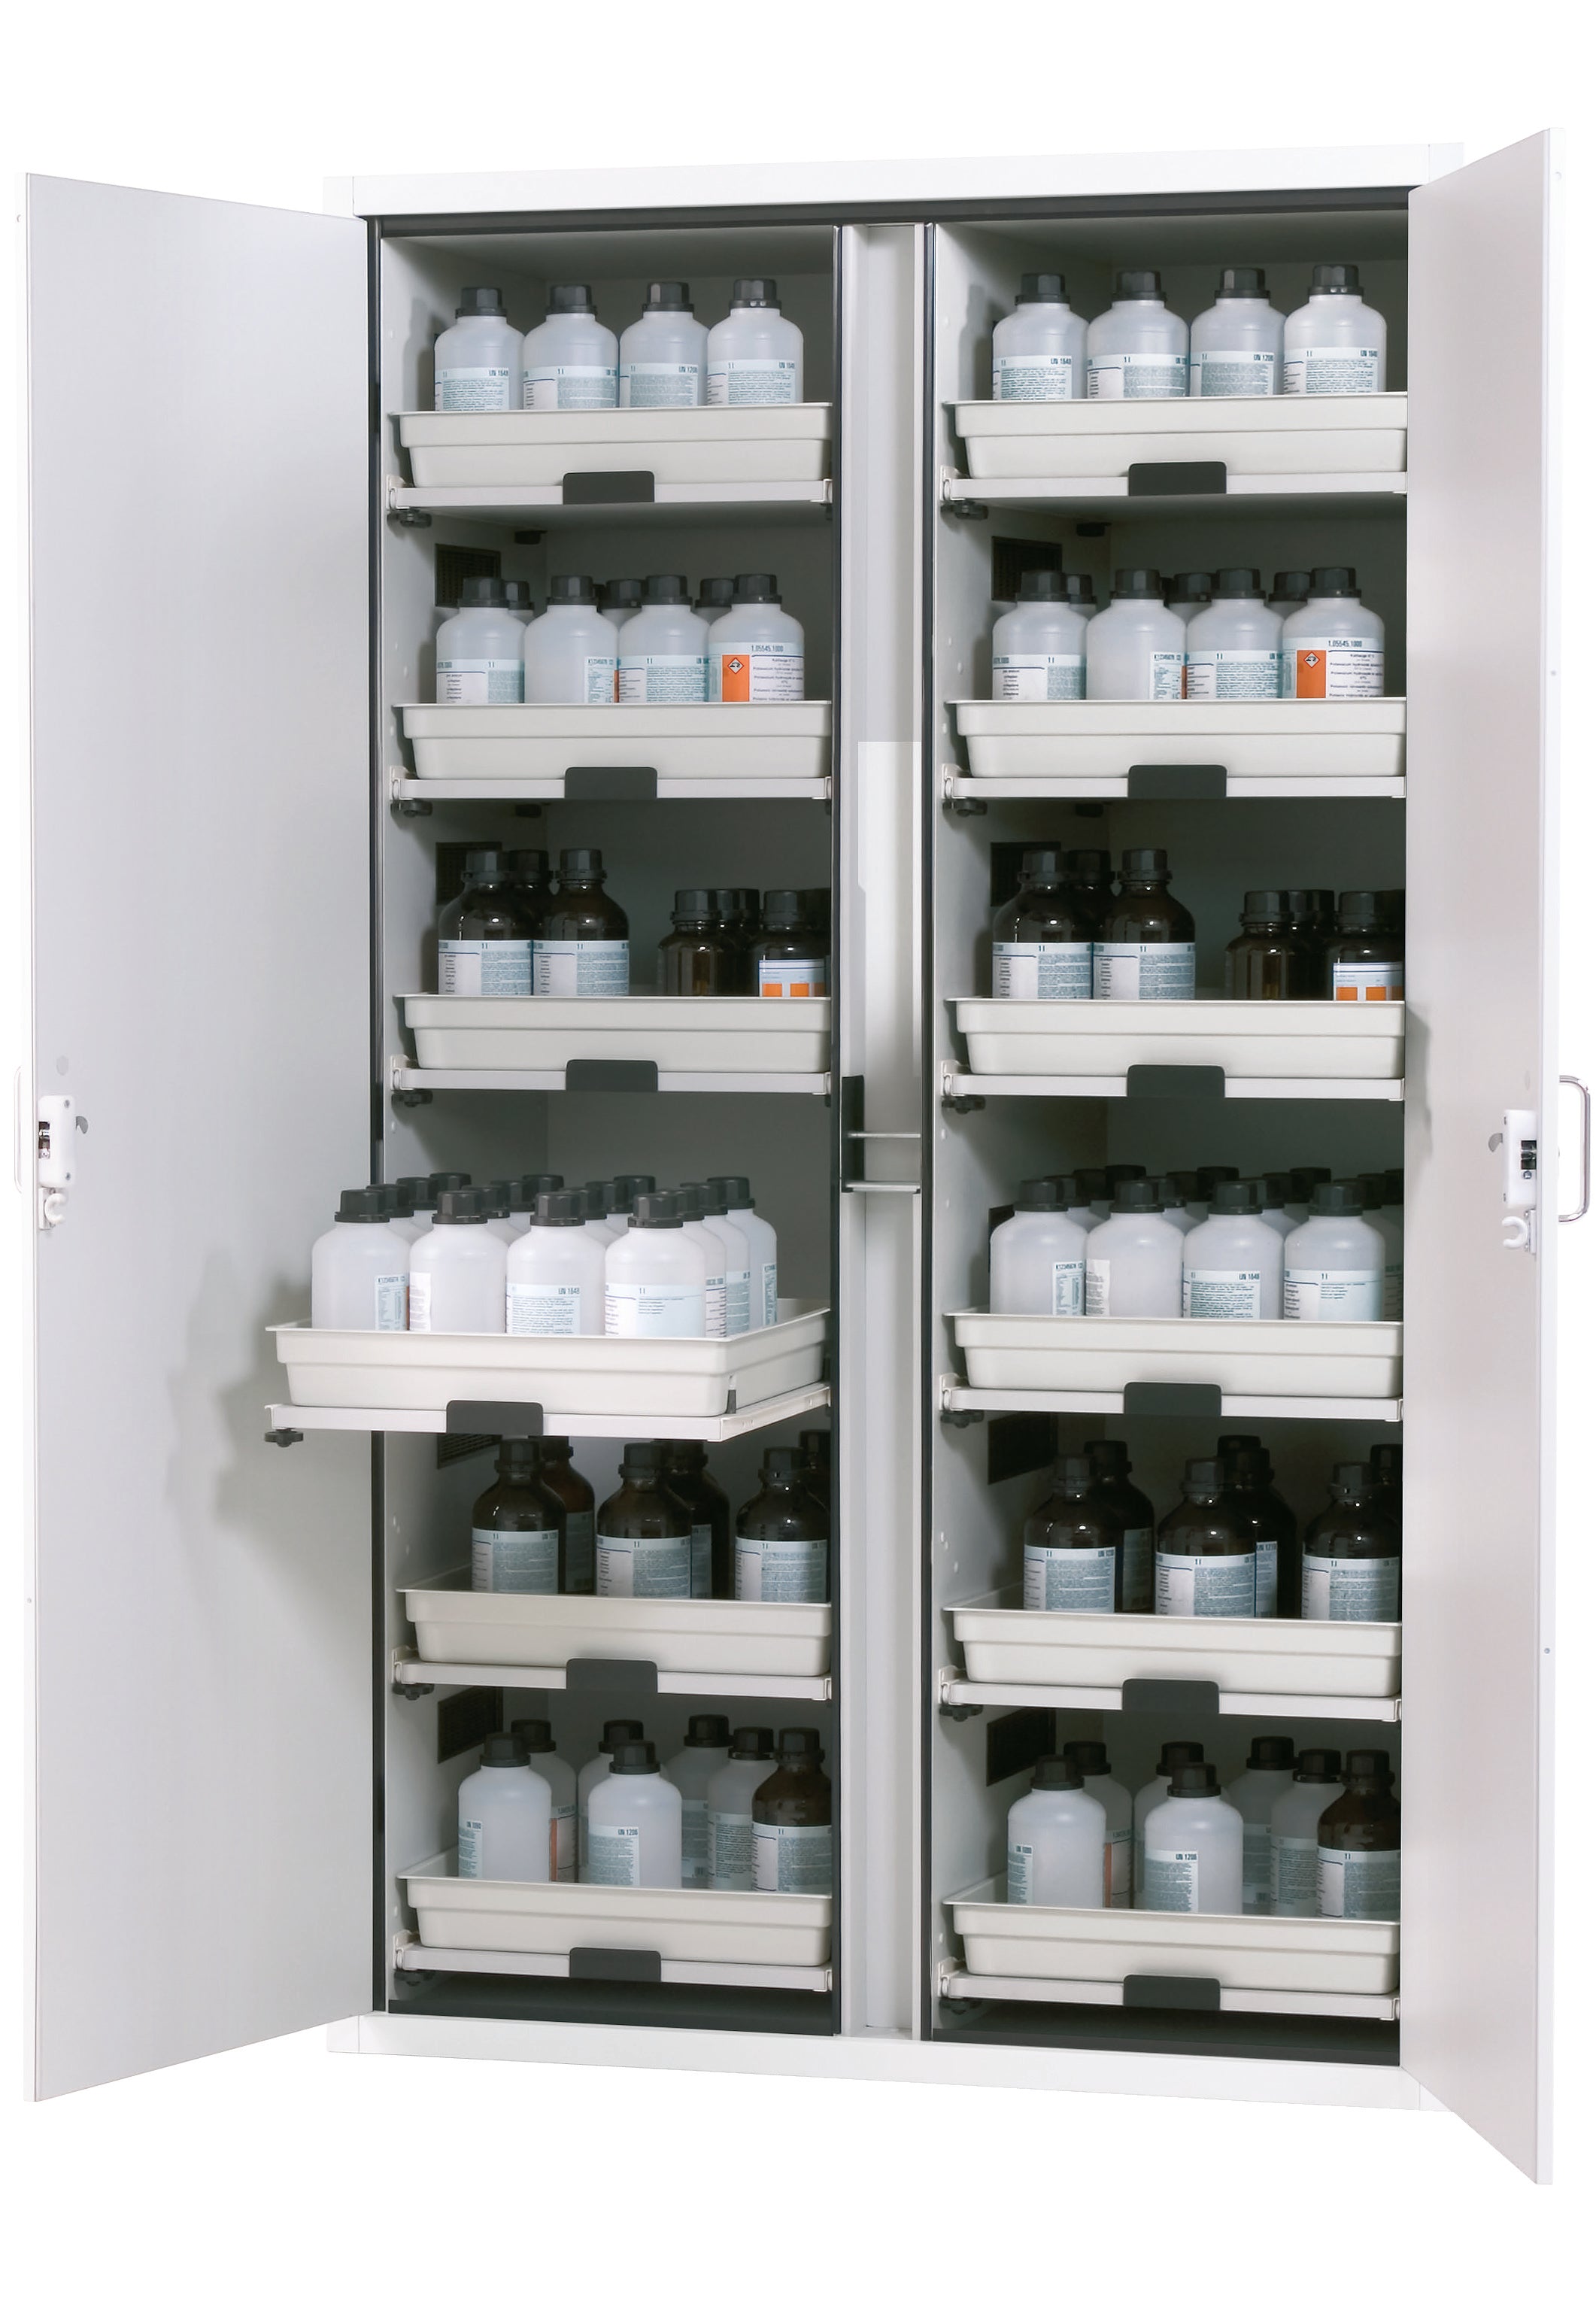 Acid and alkaline cabinet SL-CLASSIC model SL.196.120.MV in laboratory white (similar to RAL 9016) with 12x AbZ shelf pull-outs (FP plate/polypropylene)